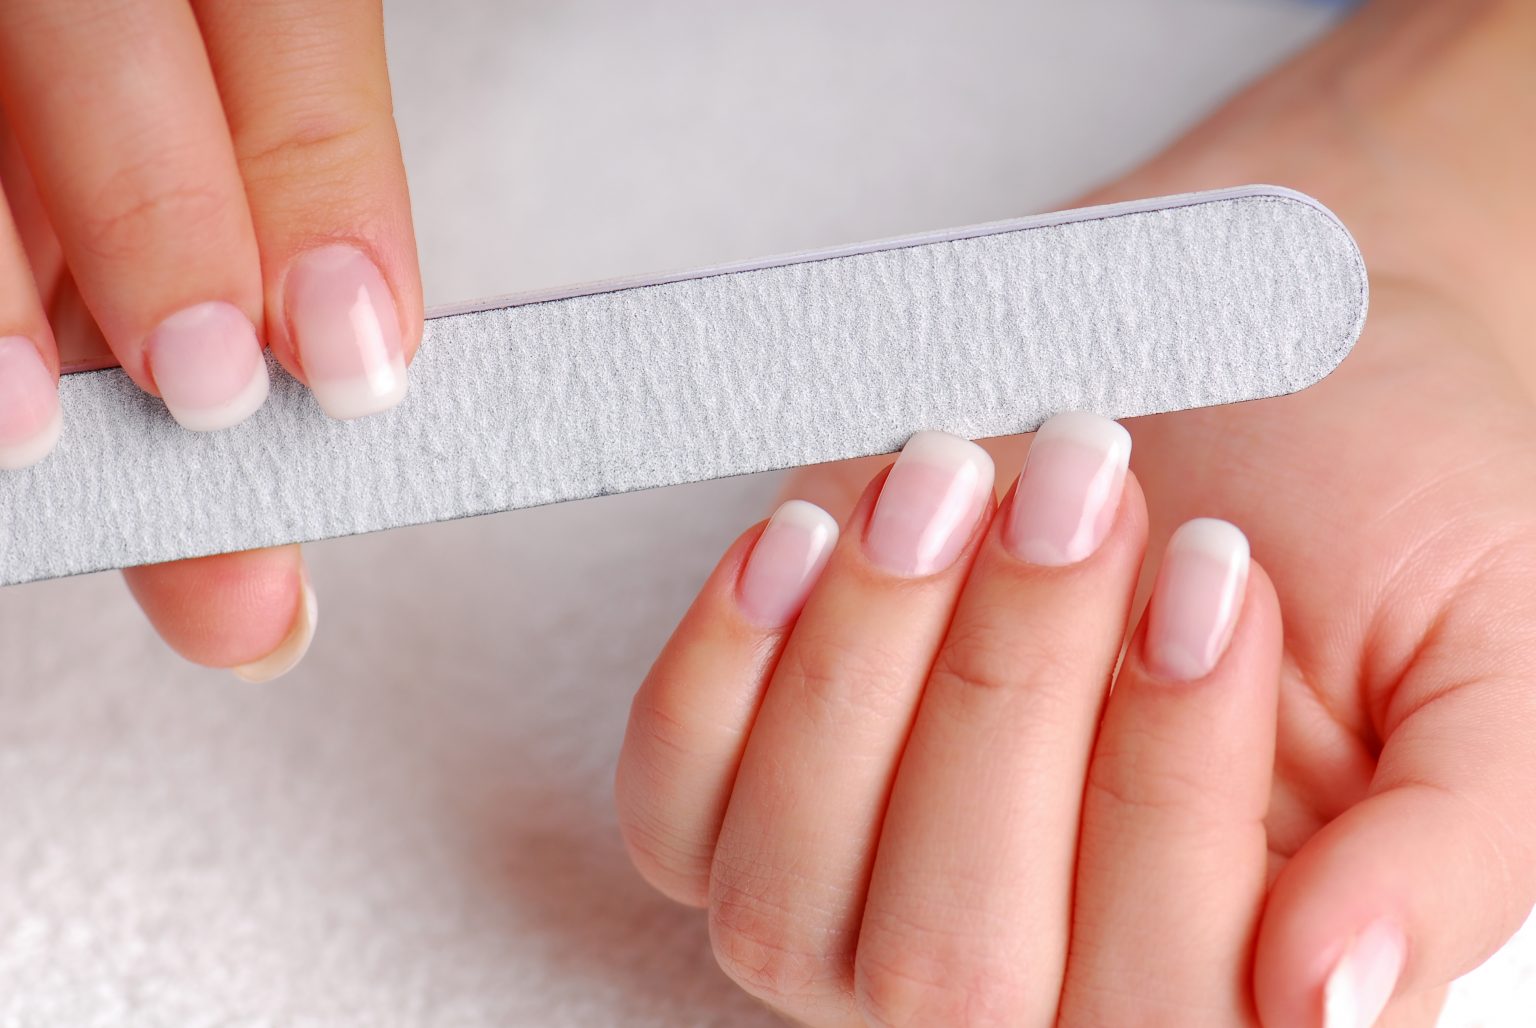 1. Cute Nail File Designs for Girls - wide 2